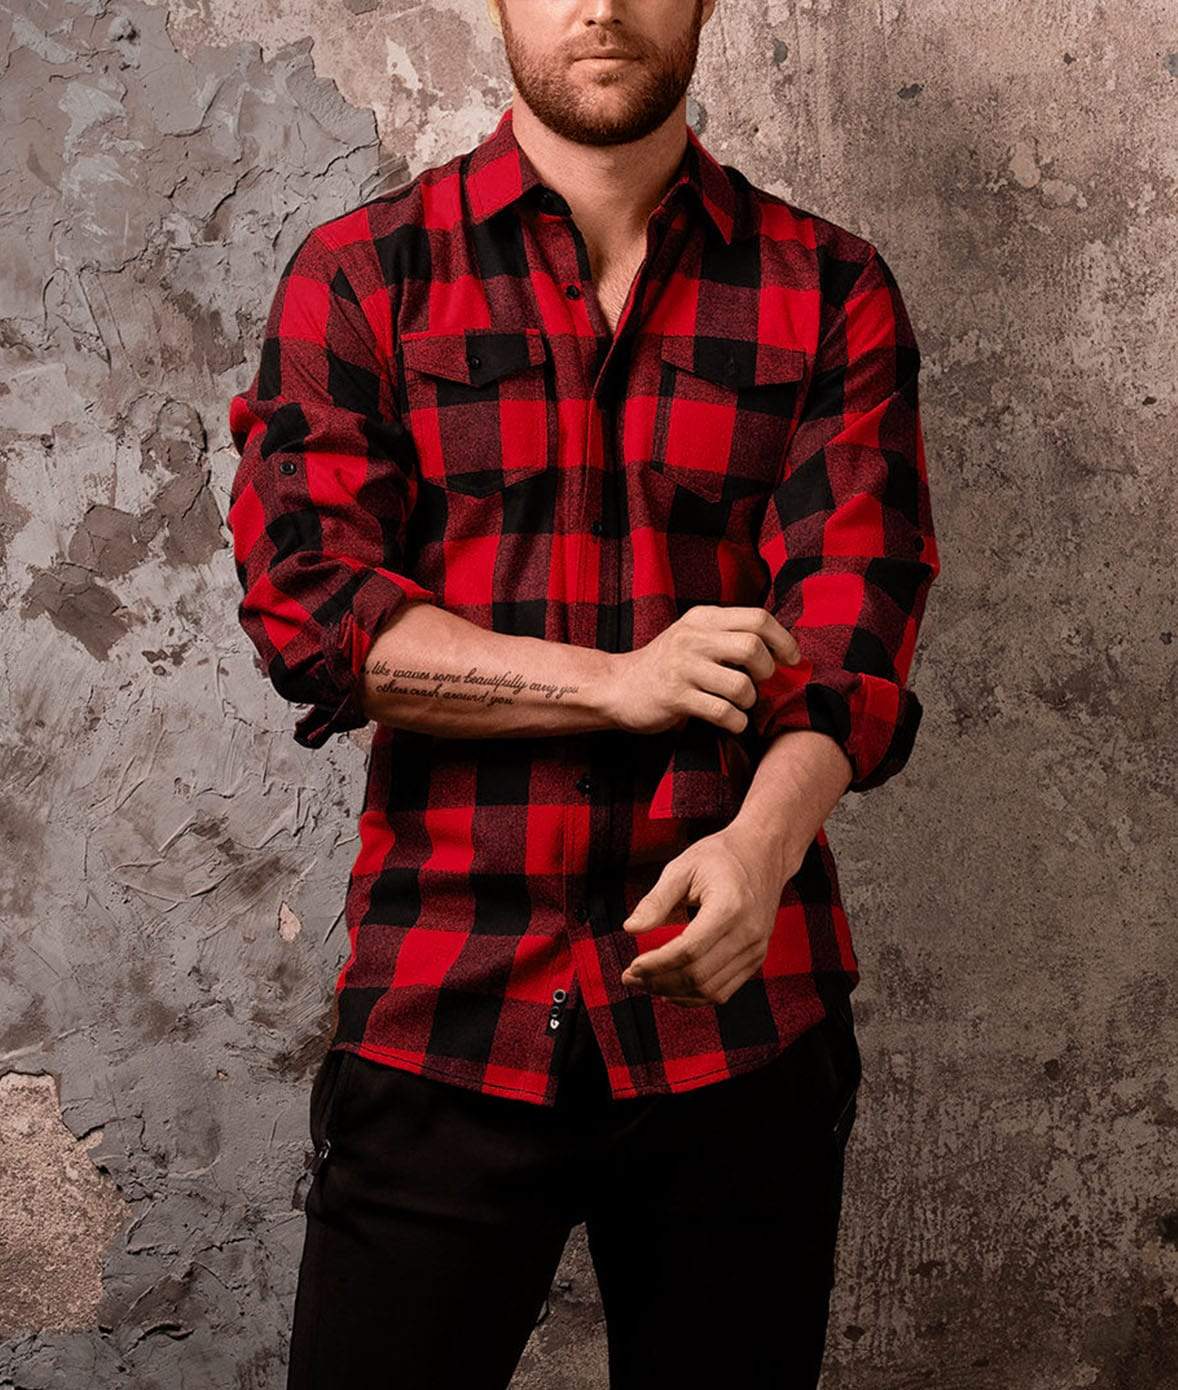 Nayked Men's Ridiculously Soft Button Down Flannel Shirt | Comfort Shirts.